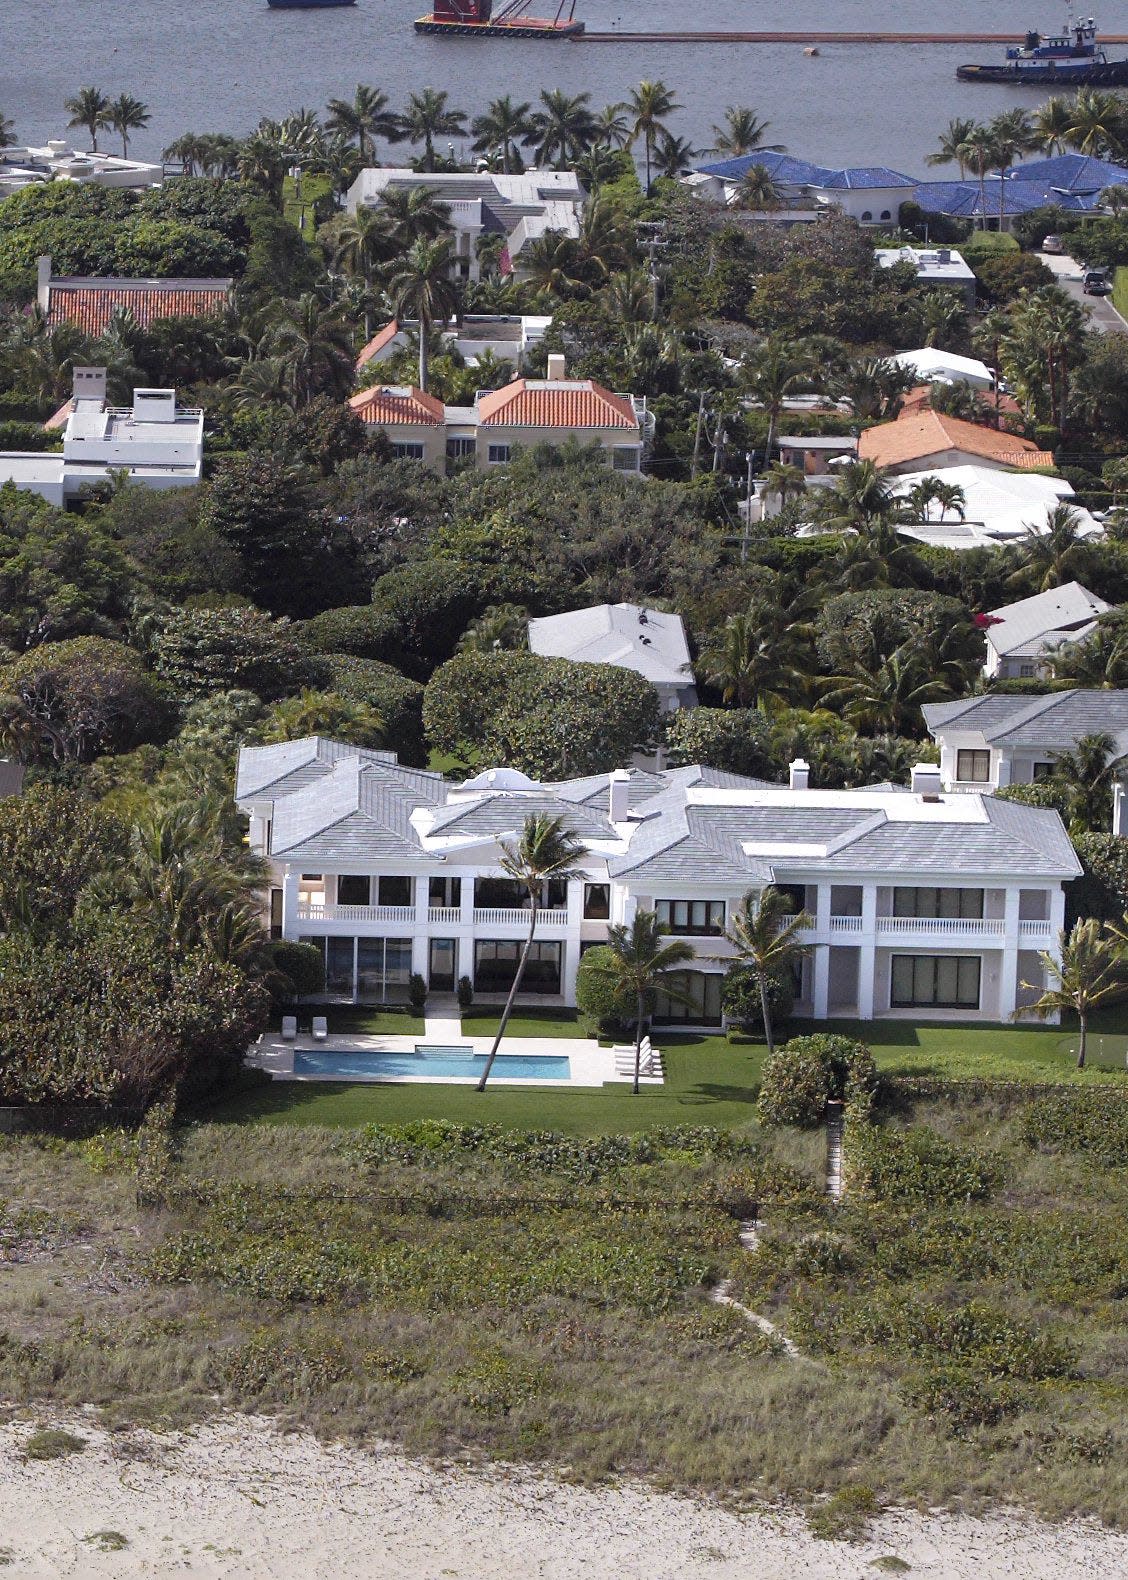 The late Rush Limbaugh owned this Palm Beach estate for years at 1495 N. Ocean Blvd., seen here in a file photo. The oceanfront estate is being demolished by cosmetics billionaire William P. Lauder, who bought it through an ownership company for a recorded $155 million in March from Limbaugh's widow, Kathryn Adams Limbaugh.